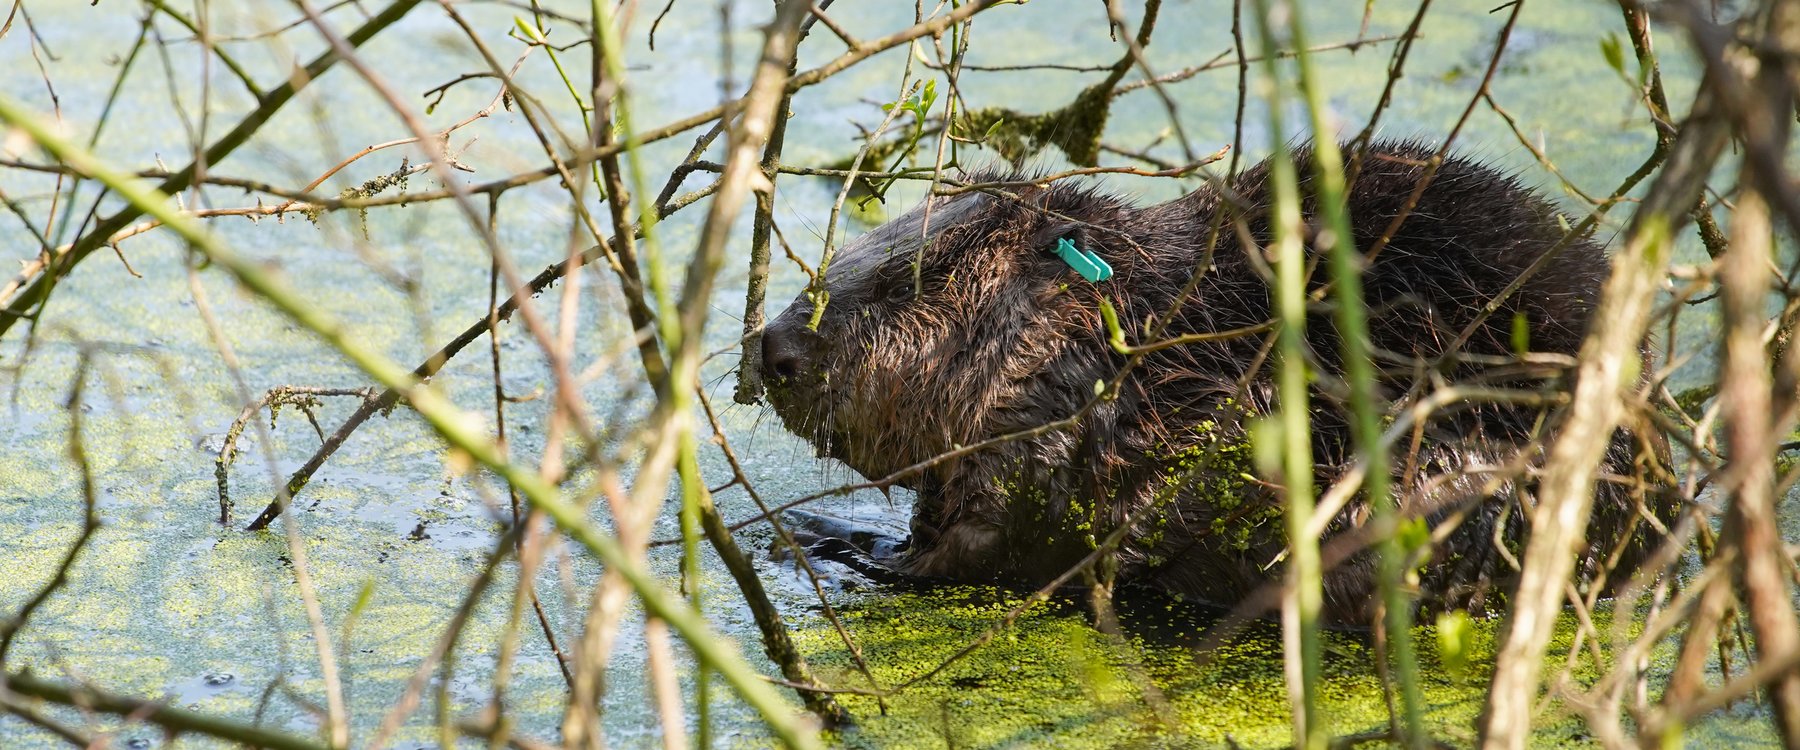 D - Beaver in pond at Cropton Forest 4  - male [©Forestry England-Sam Oak....jpg